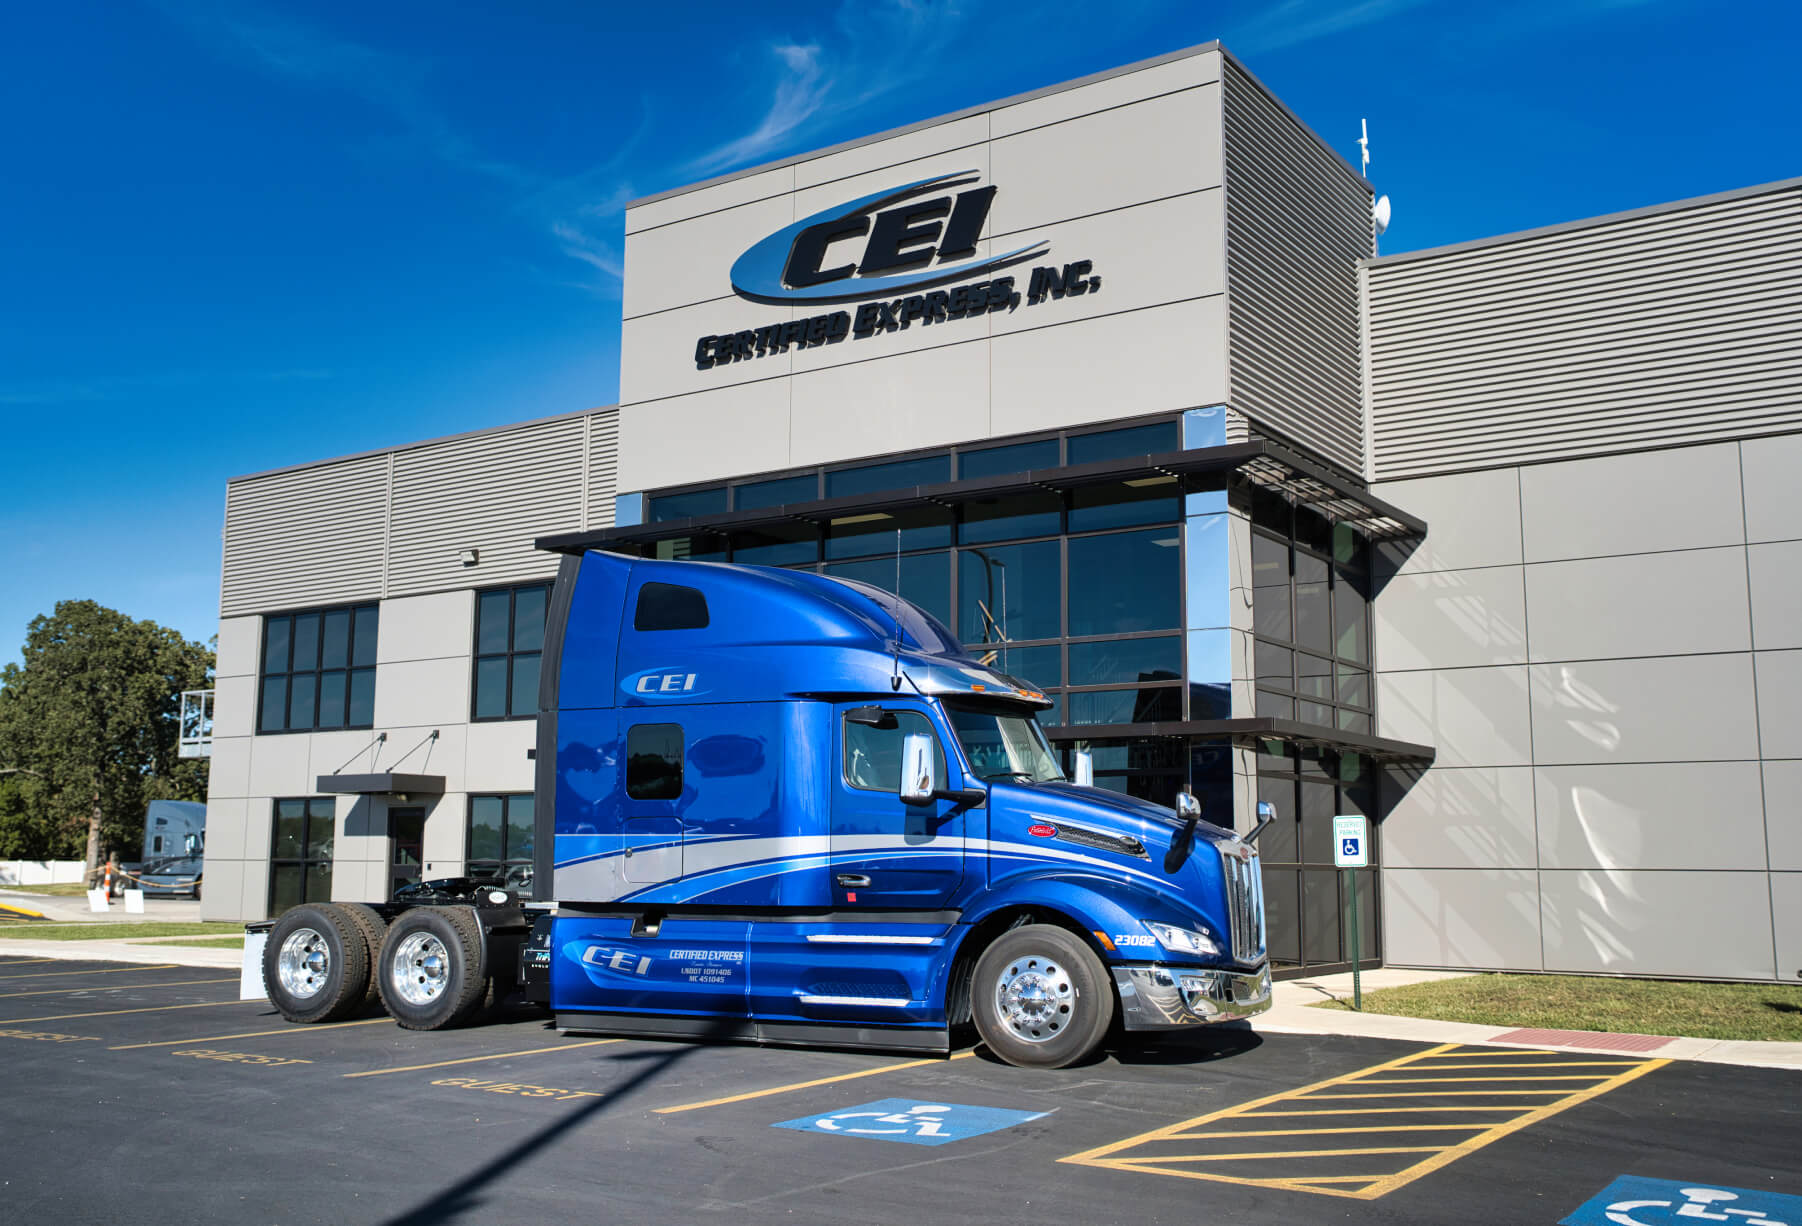 A gleaming blue CEI semi truck is parked in front of headquarters under a clear blue sky.